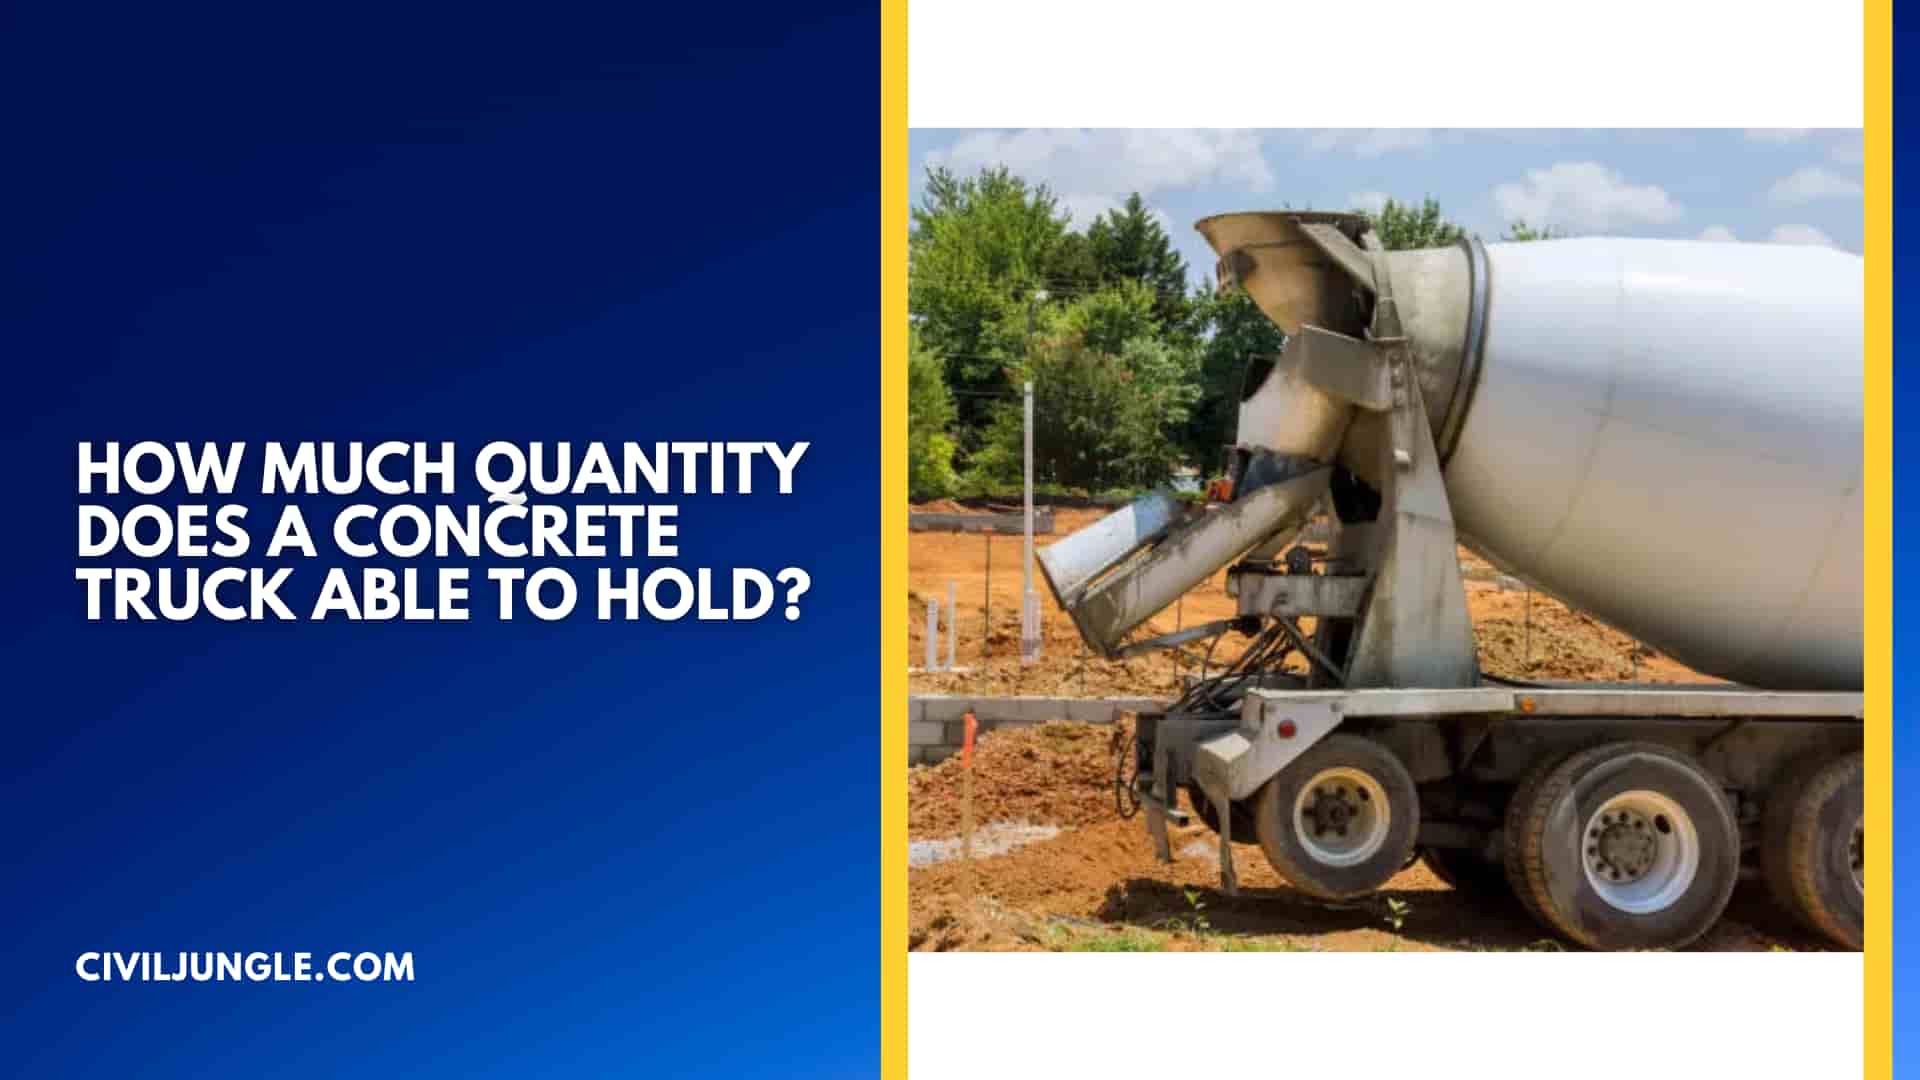 How Much Quantity Does a Concrete Truck Able to Hold?